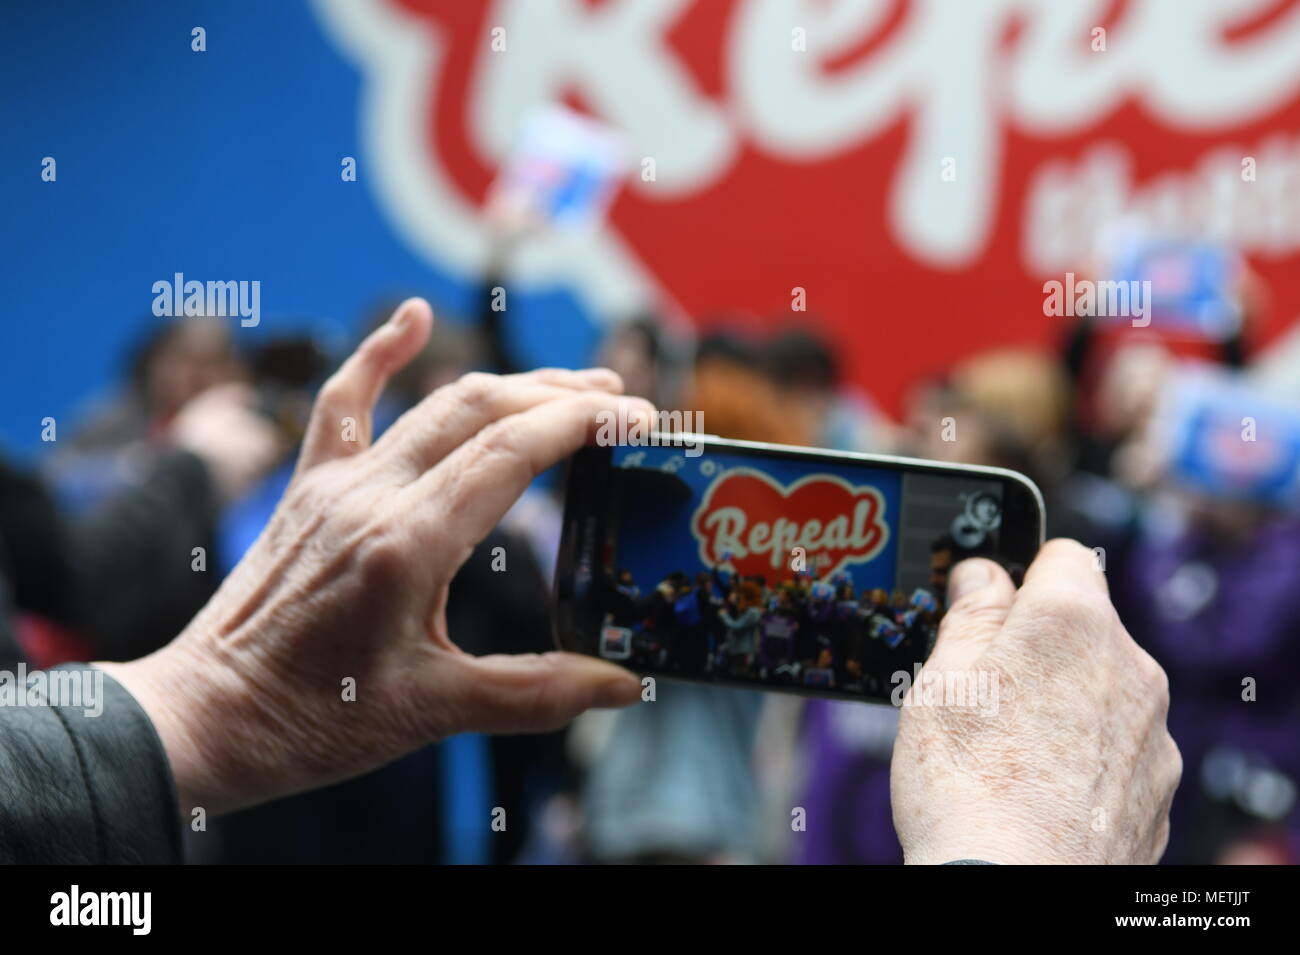 ‘Repeal the 8th’ mural from wallProject says Charities Regulator took view that mural is political activity that breaches Act Credit: john Rooney/Alamy Live News Stock Photo